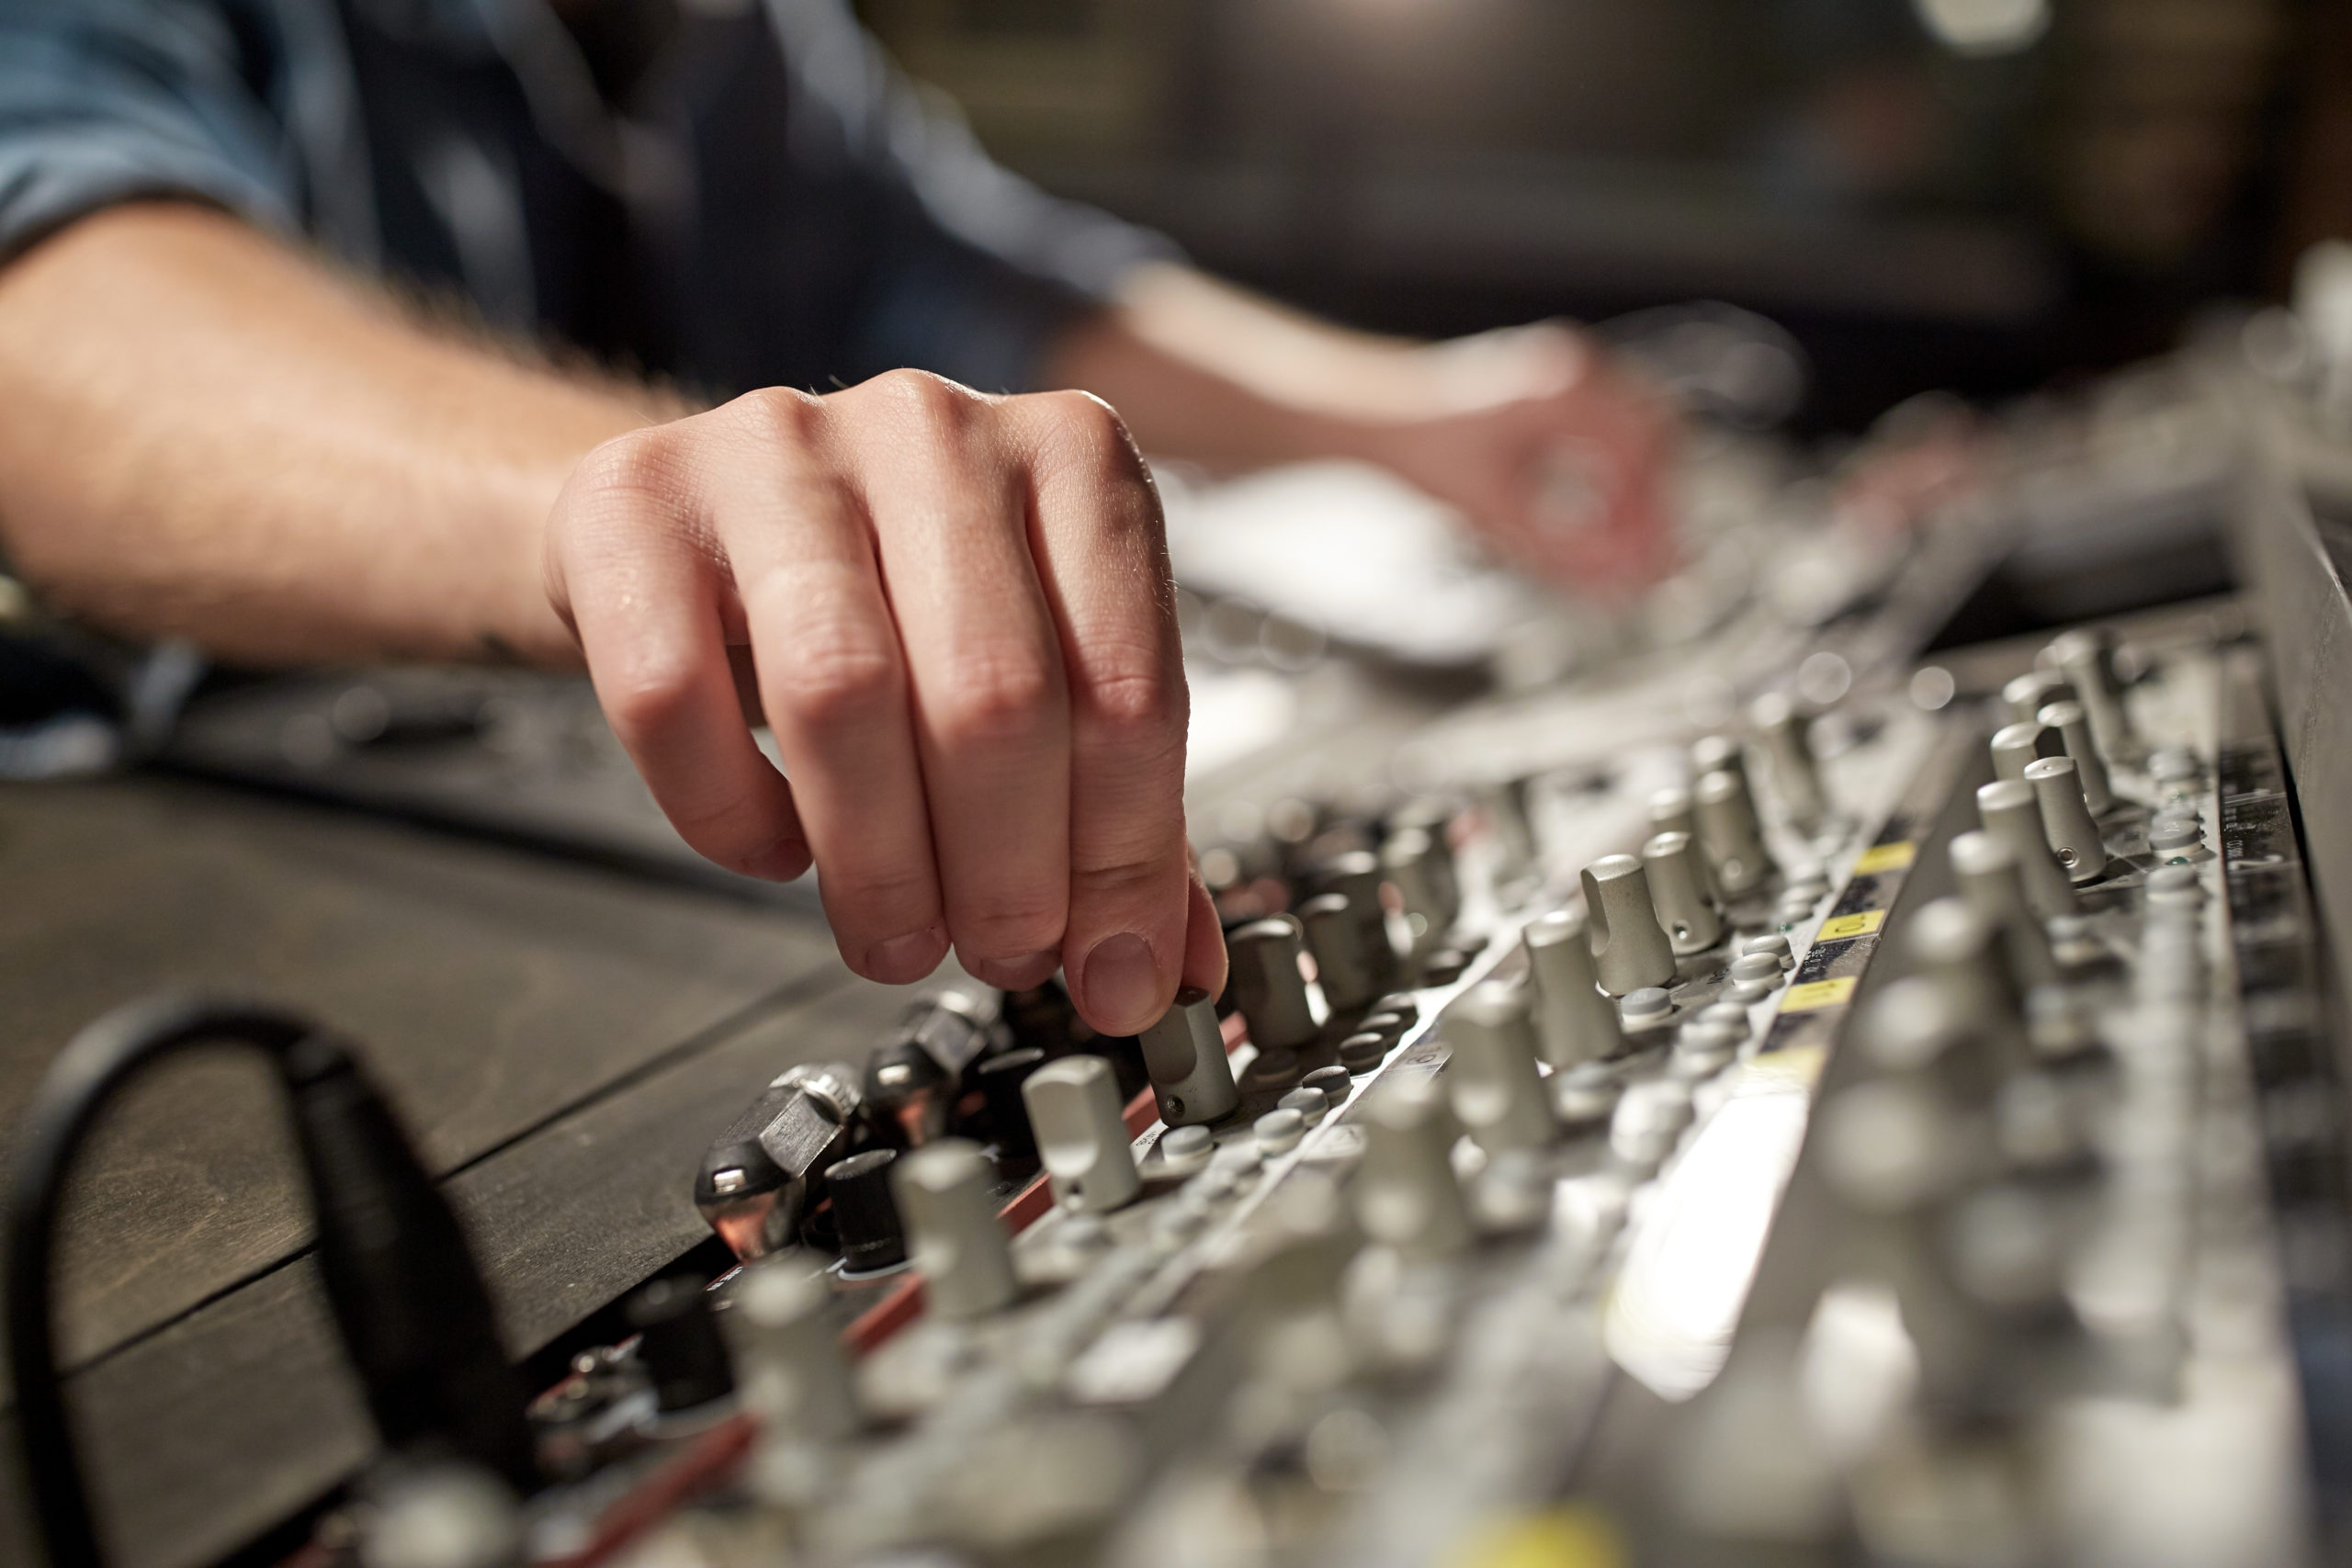 music, technology, people and equipment concept - man using mixing console in sound recording studio